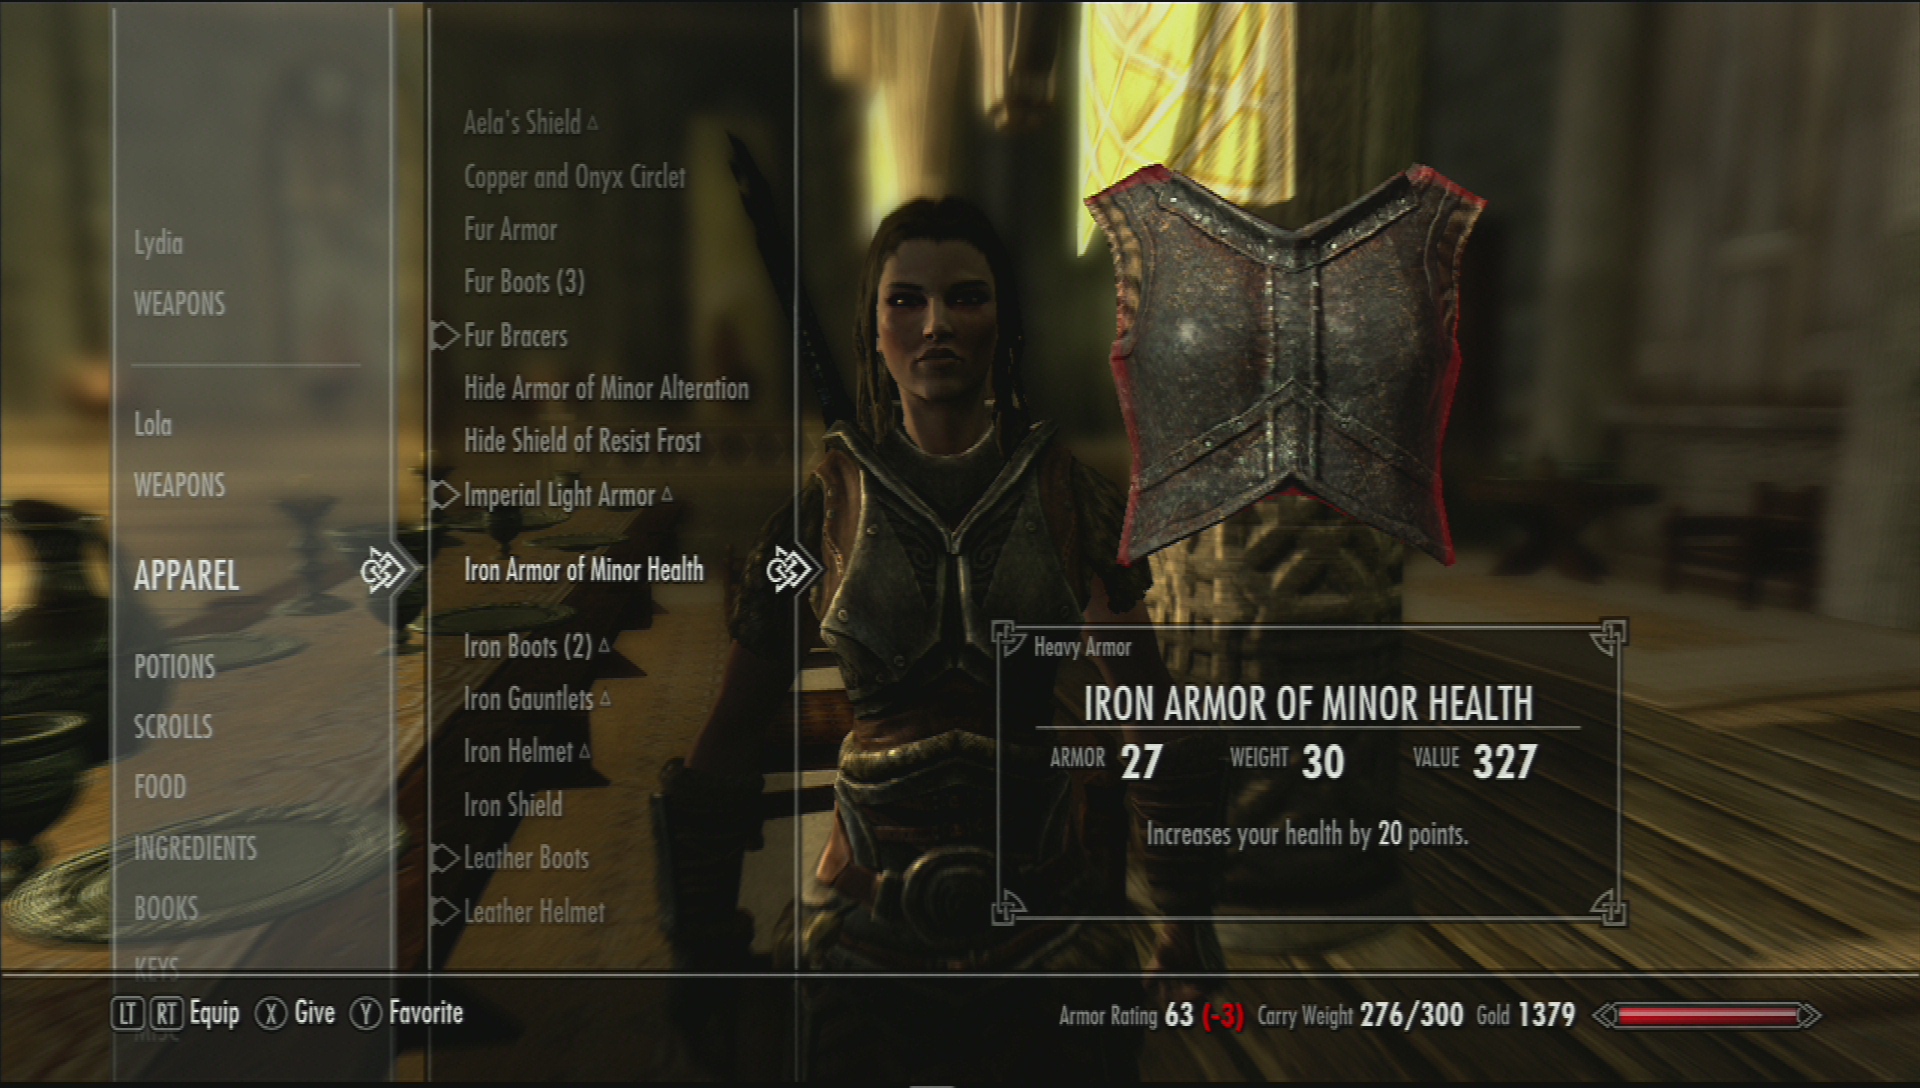 Skyrim's menu for trading with your follower